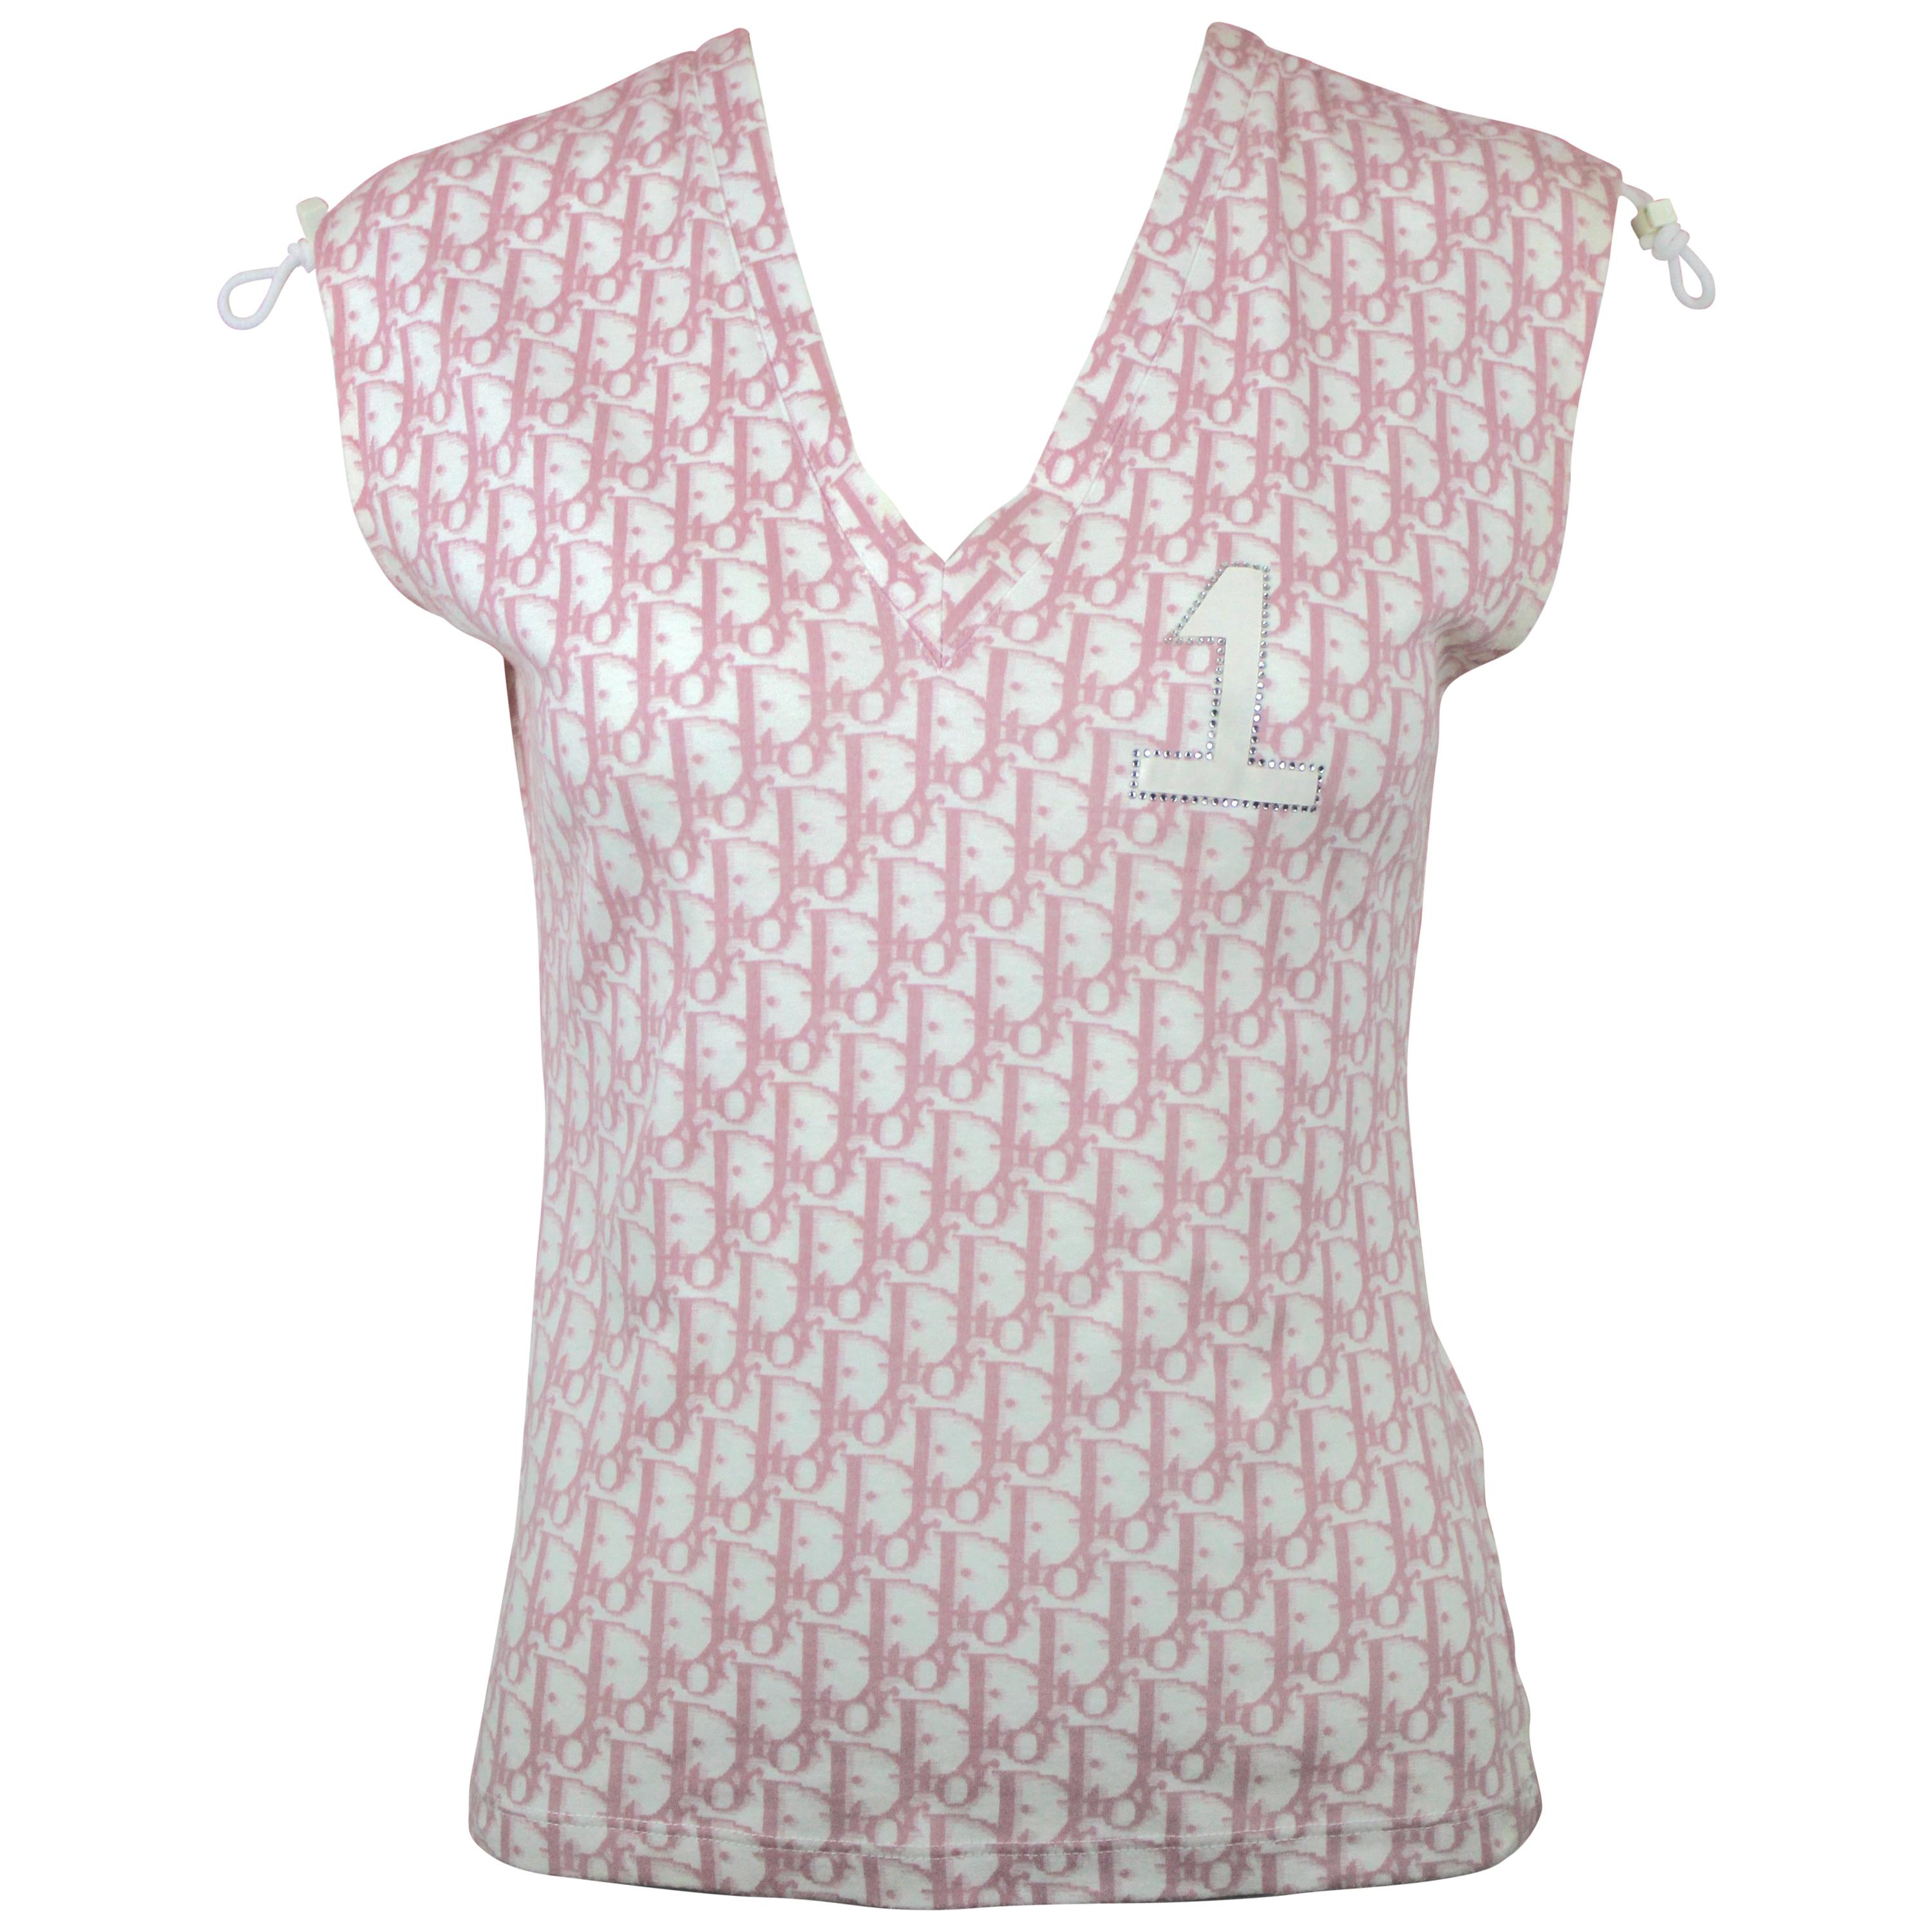 Dior Pink Monogram Tank with Toggles, c. 2000's, size 6 US